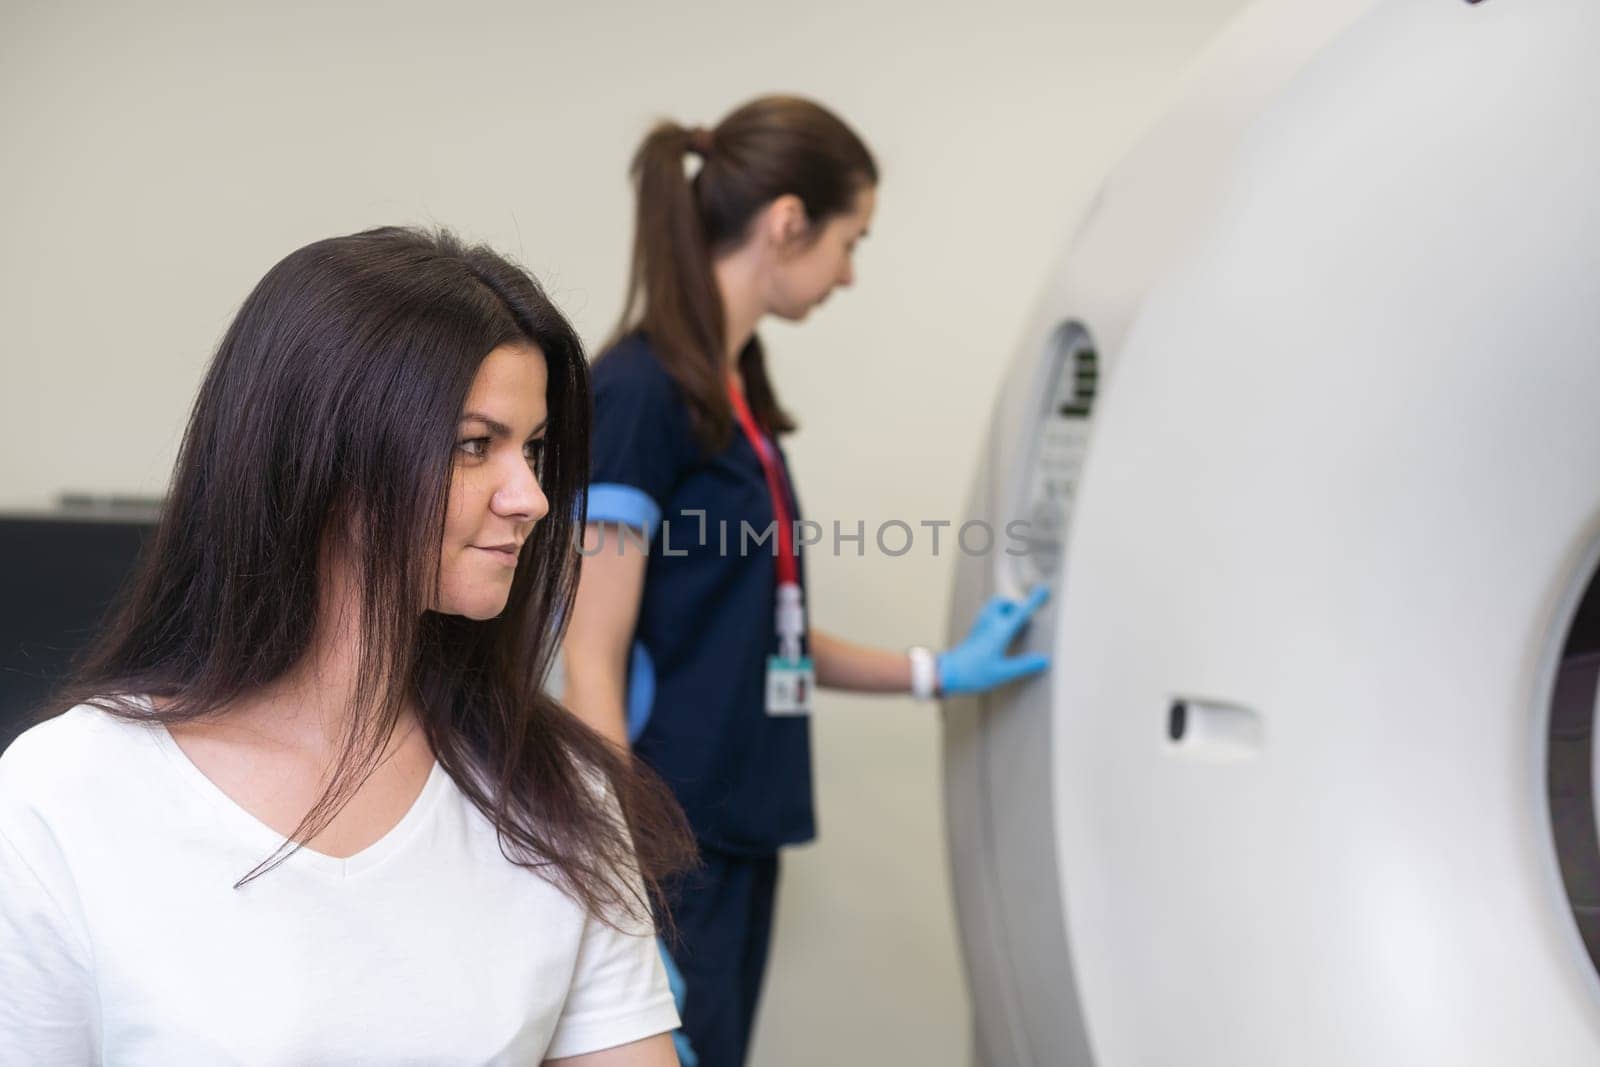 CT (Computed tomography) scanner in hospital laboratory by Andelov13